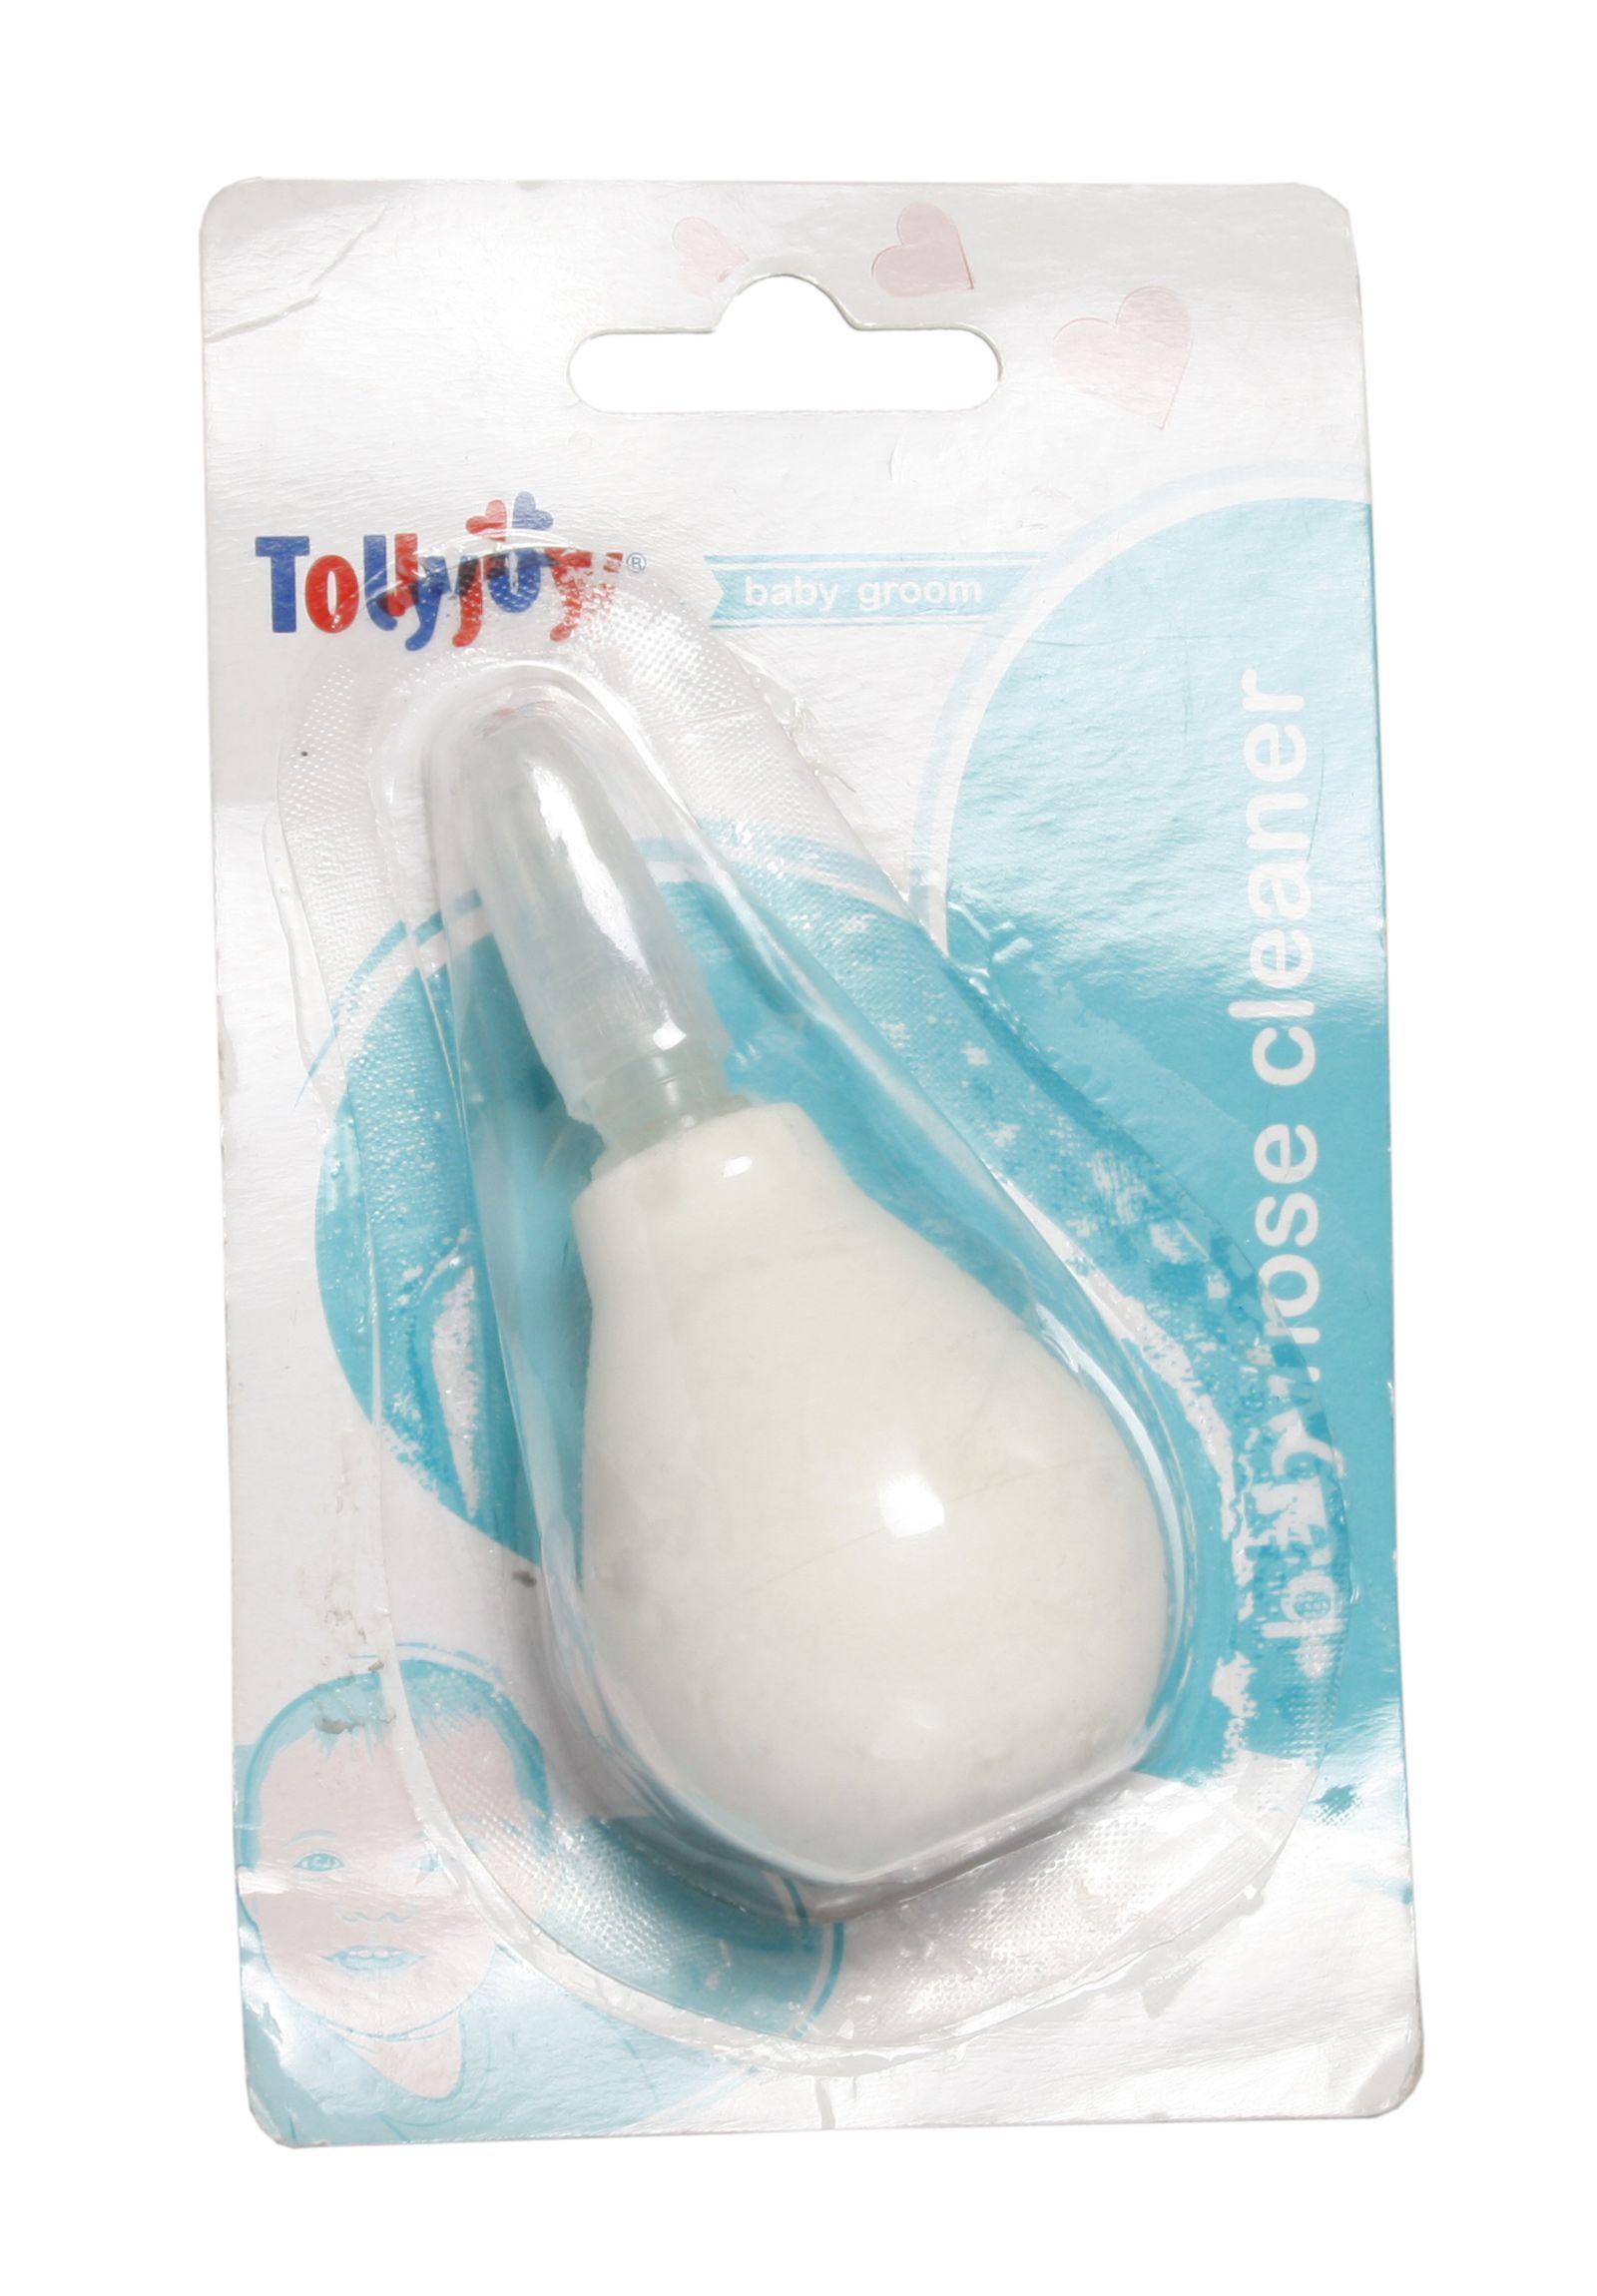 Tollyjoy Baby Nose cleaner